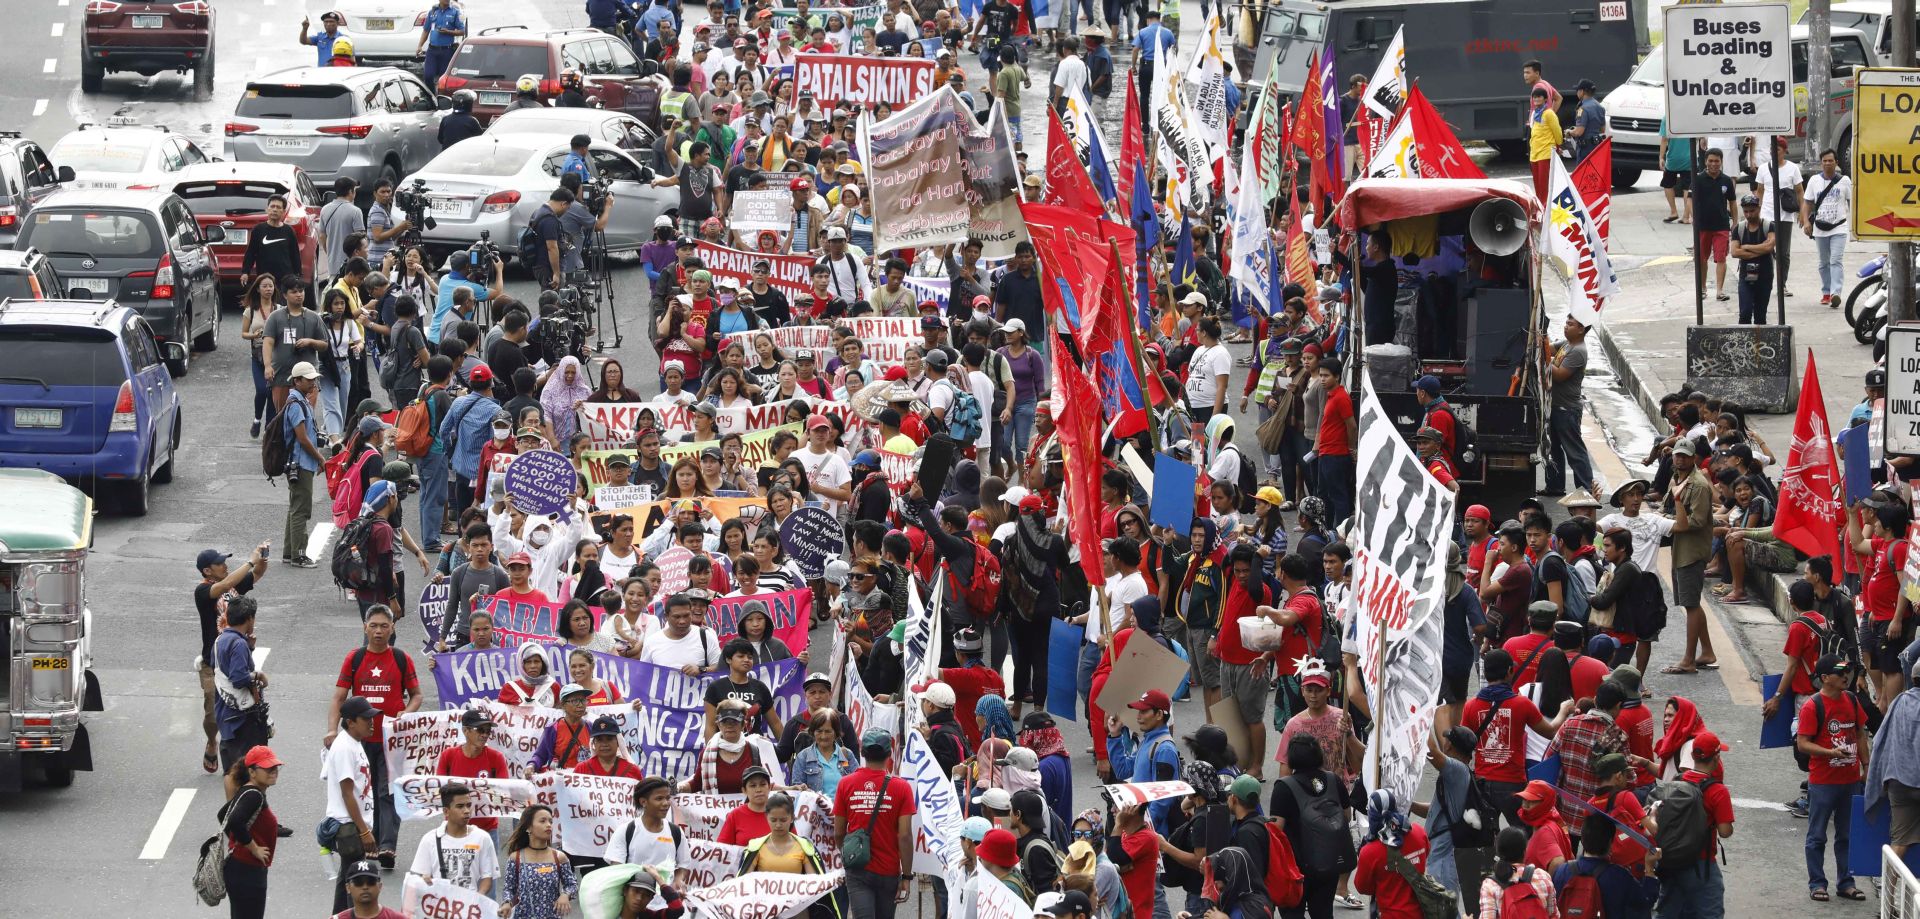 epa06905604 Protesters critical of Philippine President Rodrigo Duterte hold a rally on a road leading to the Philippine Congress in Quezon City, east of Manila, Philippines, 23 July 2018. Philippine President Rodrigo Duterte is expected to deliver his third State of the Nation Address (SONA) at the Philippine Congress on 23 July, amidst demonstrations in the streets by both his supporters and critics.  EPA/ROLEX DELA PENA